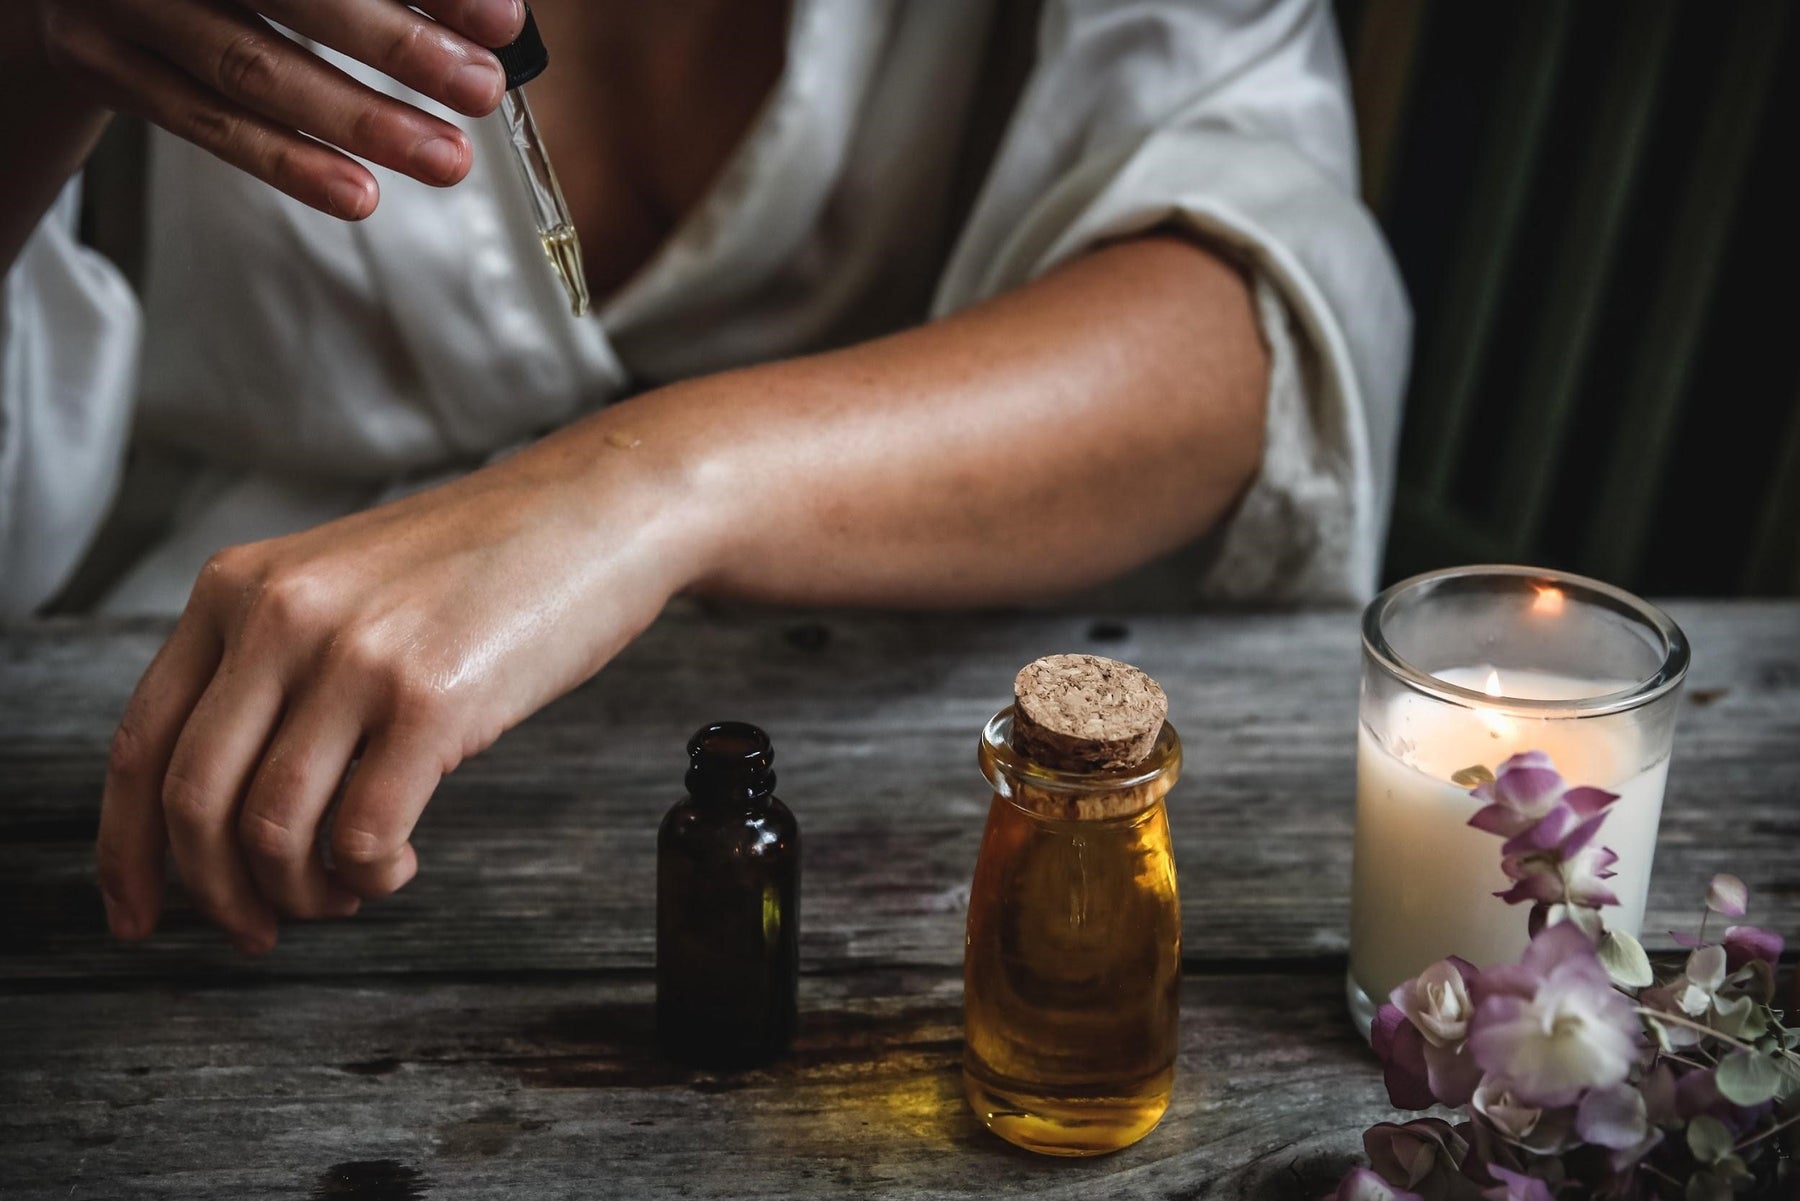 How Do You Recognise Pure Oudh Oil?